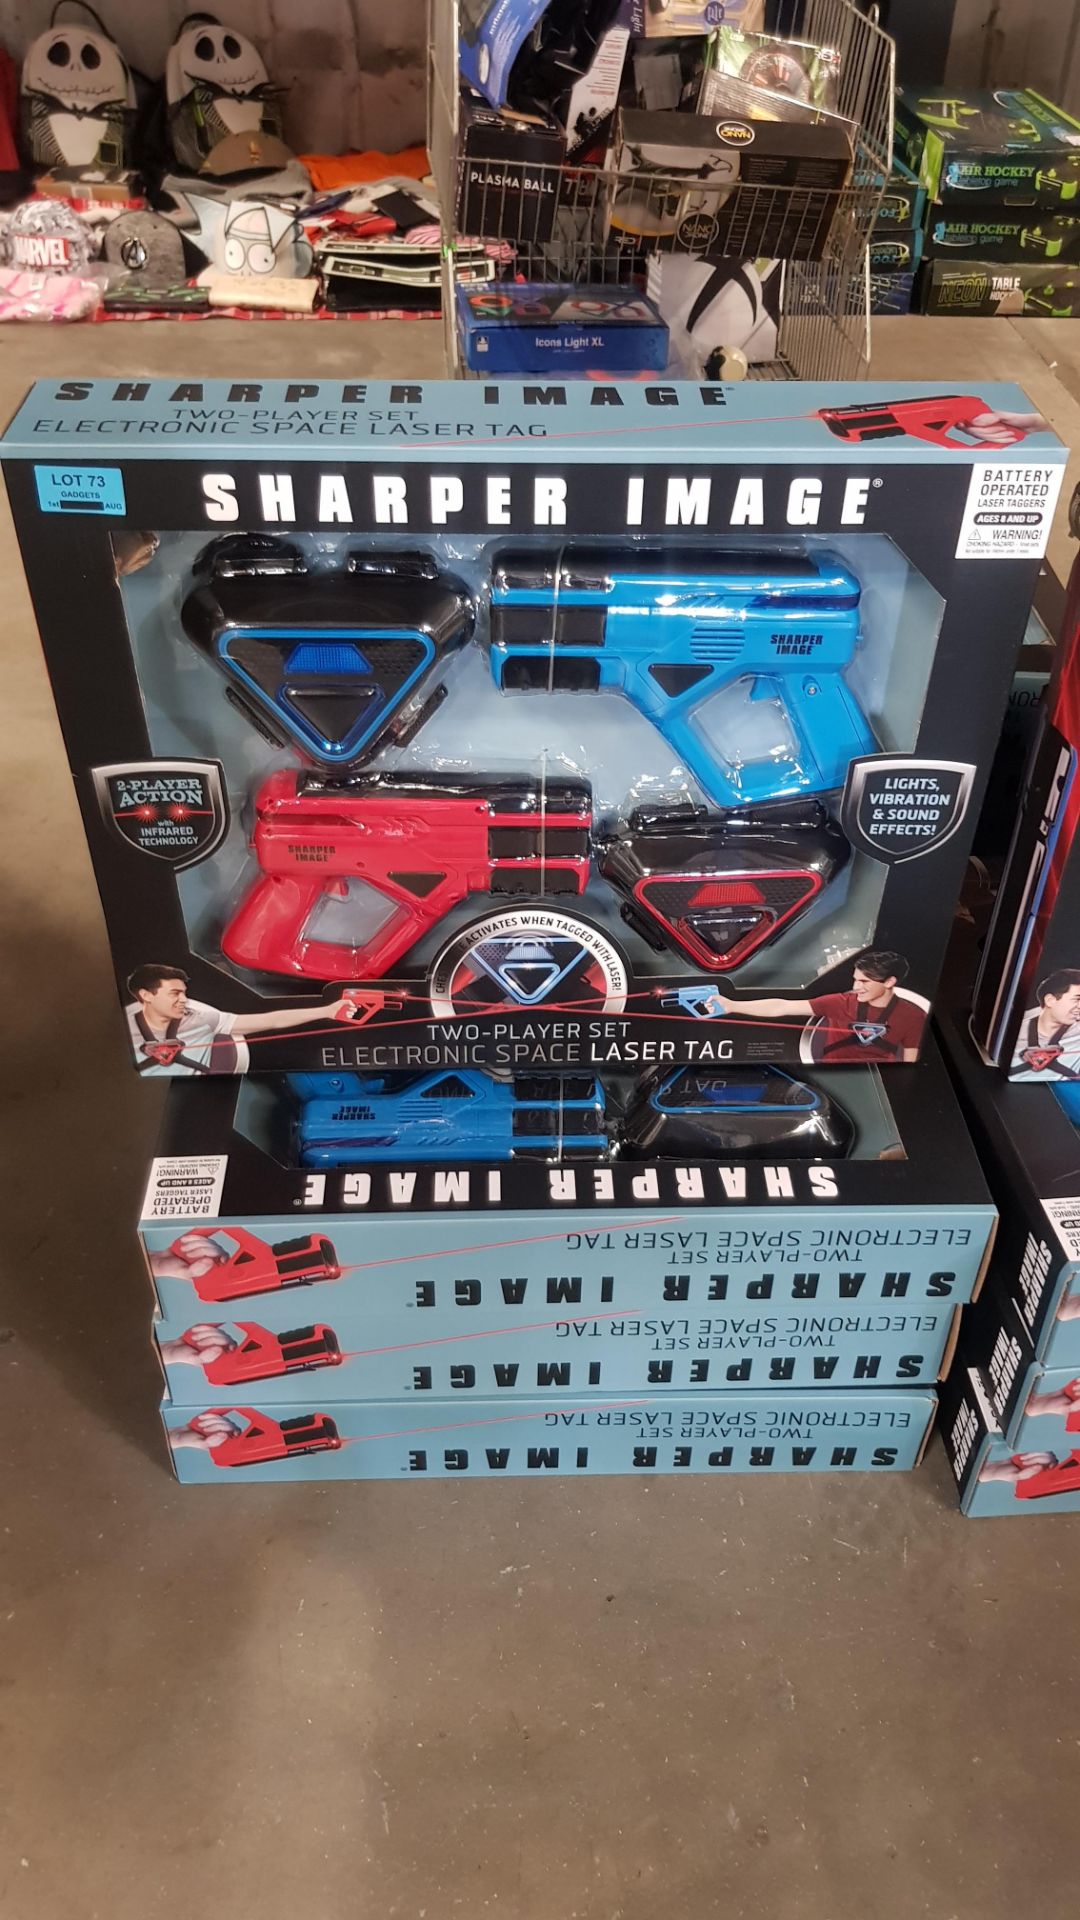 (R11A) 4x Sharper Image Electronic Space Laser Tag RRP £35 Each. Two Player Set Electronic Space La - Image 4 of 4